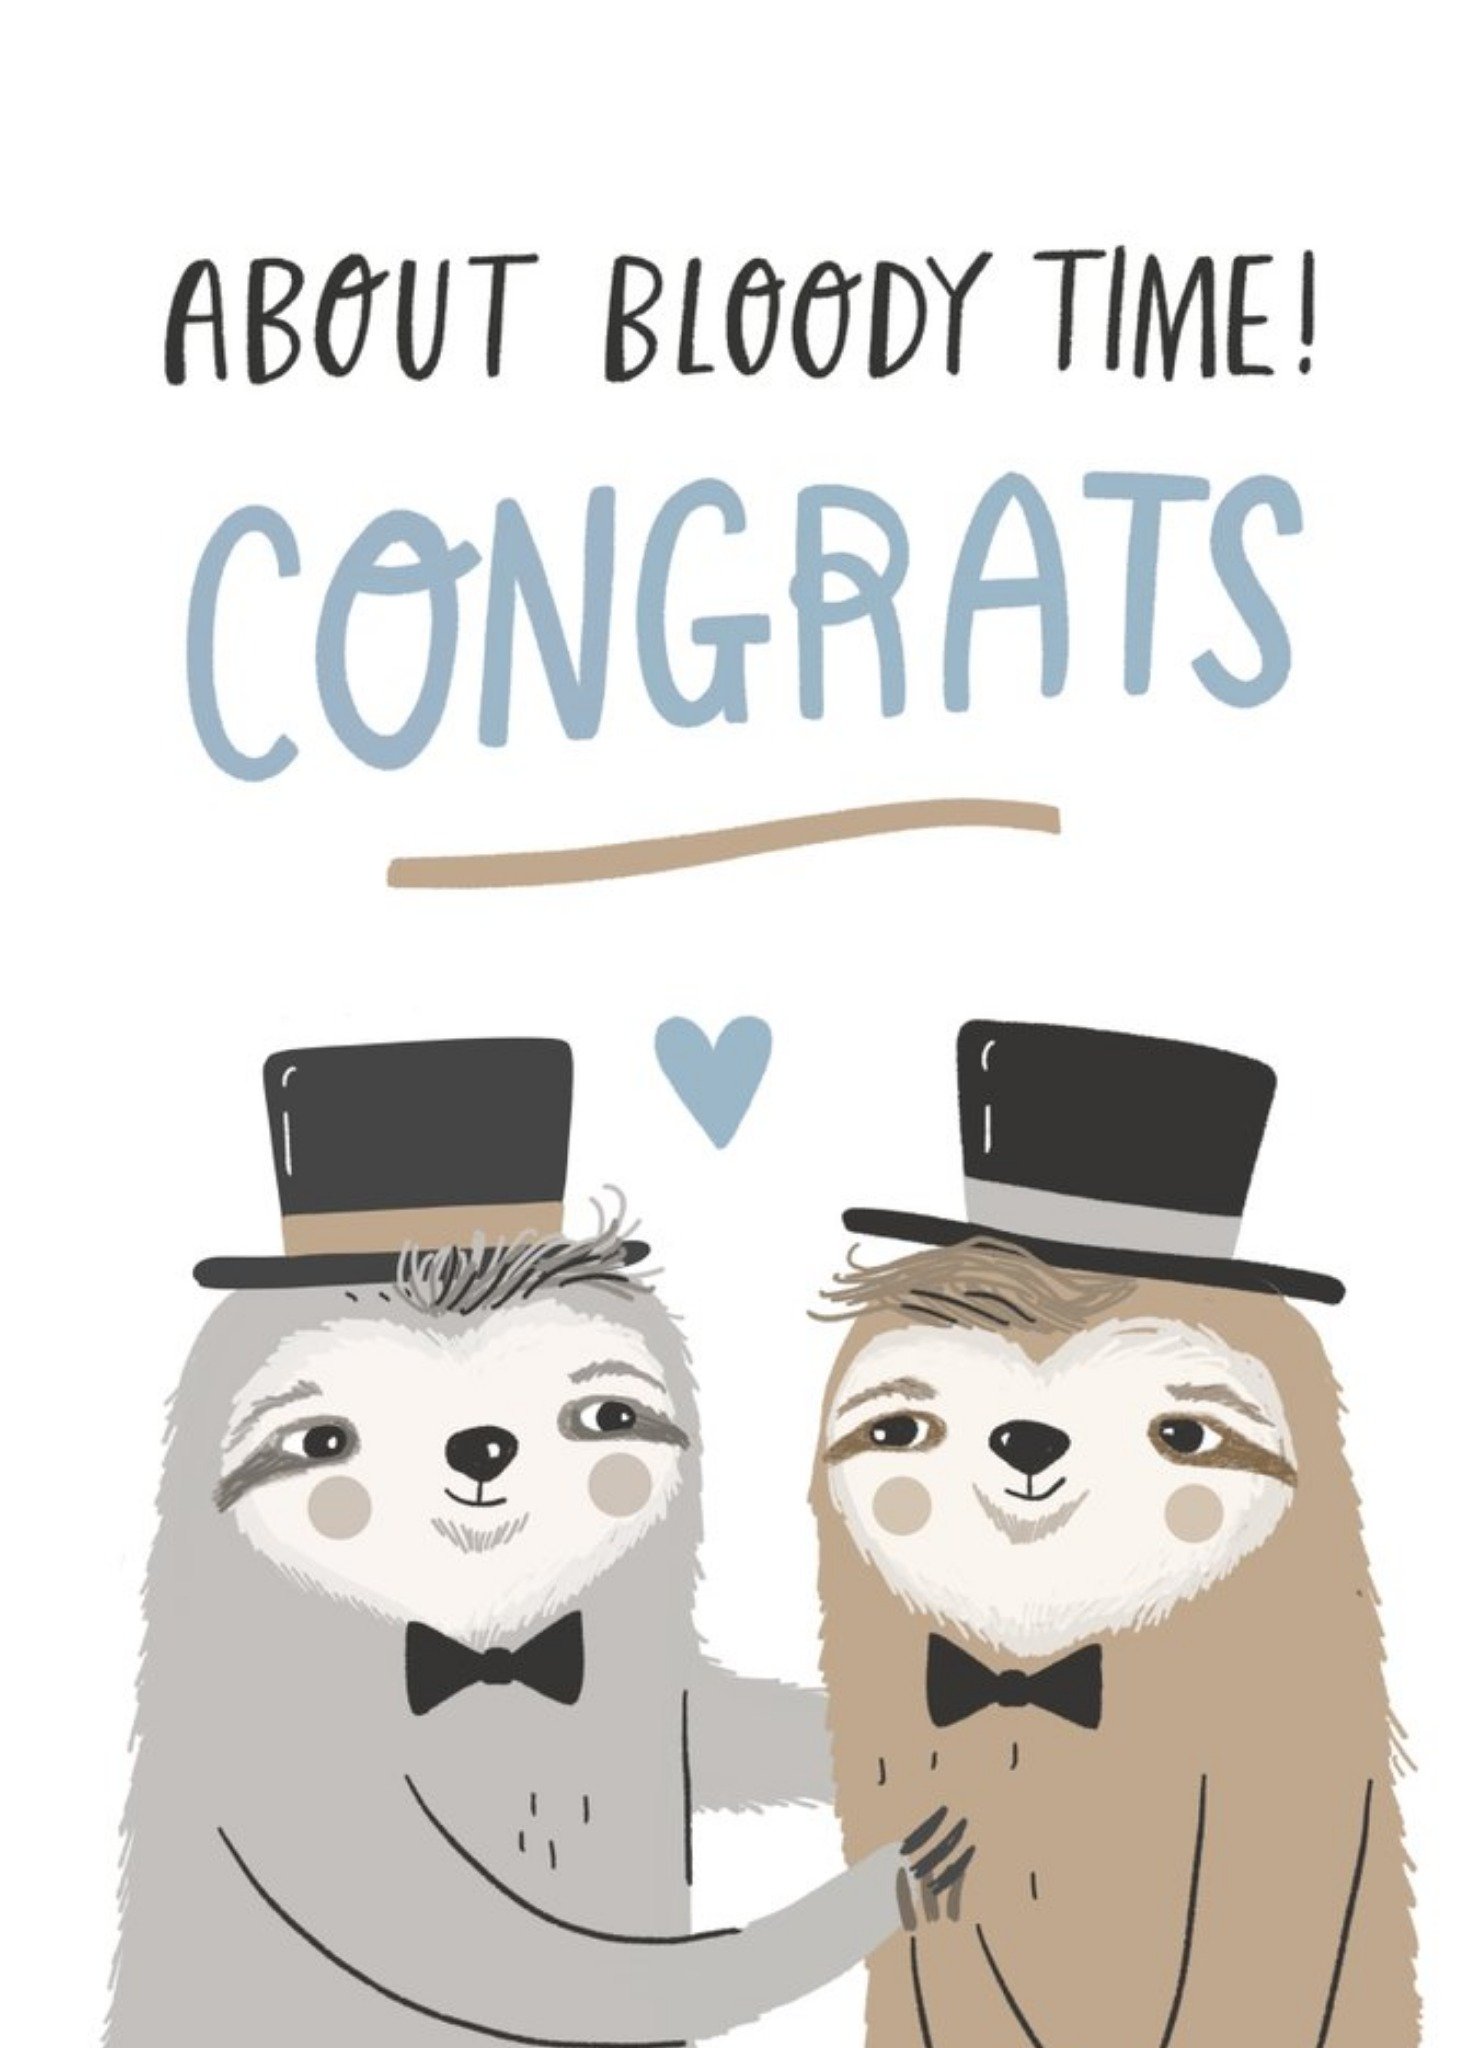 Moonpig Funny Sloth About Bloody Time Congrats Wedding Card, Large